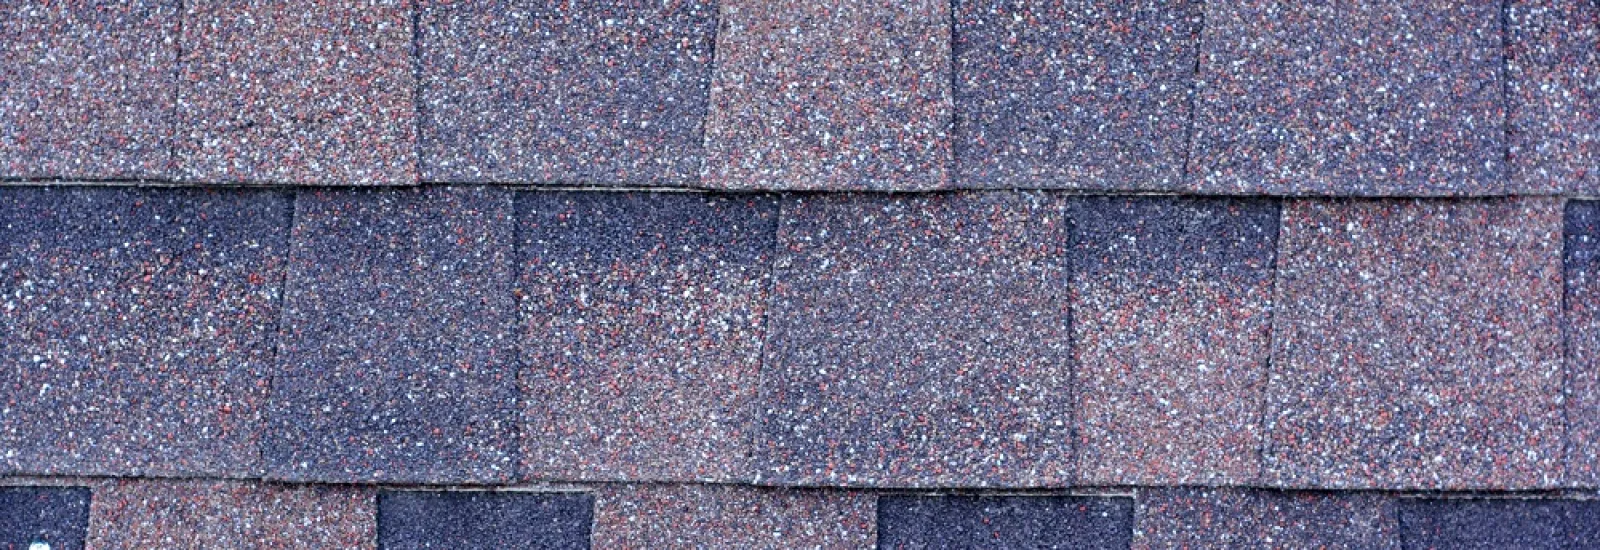 Improve the Look of Your Home with an Asphalt Roof in Tampa